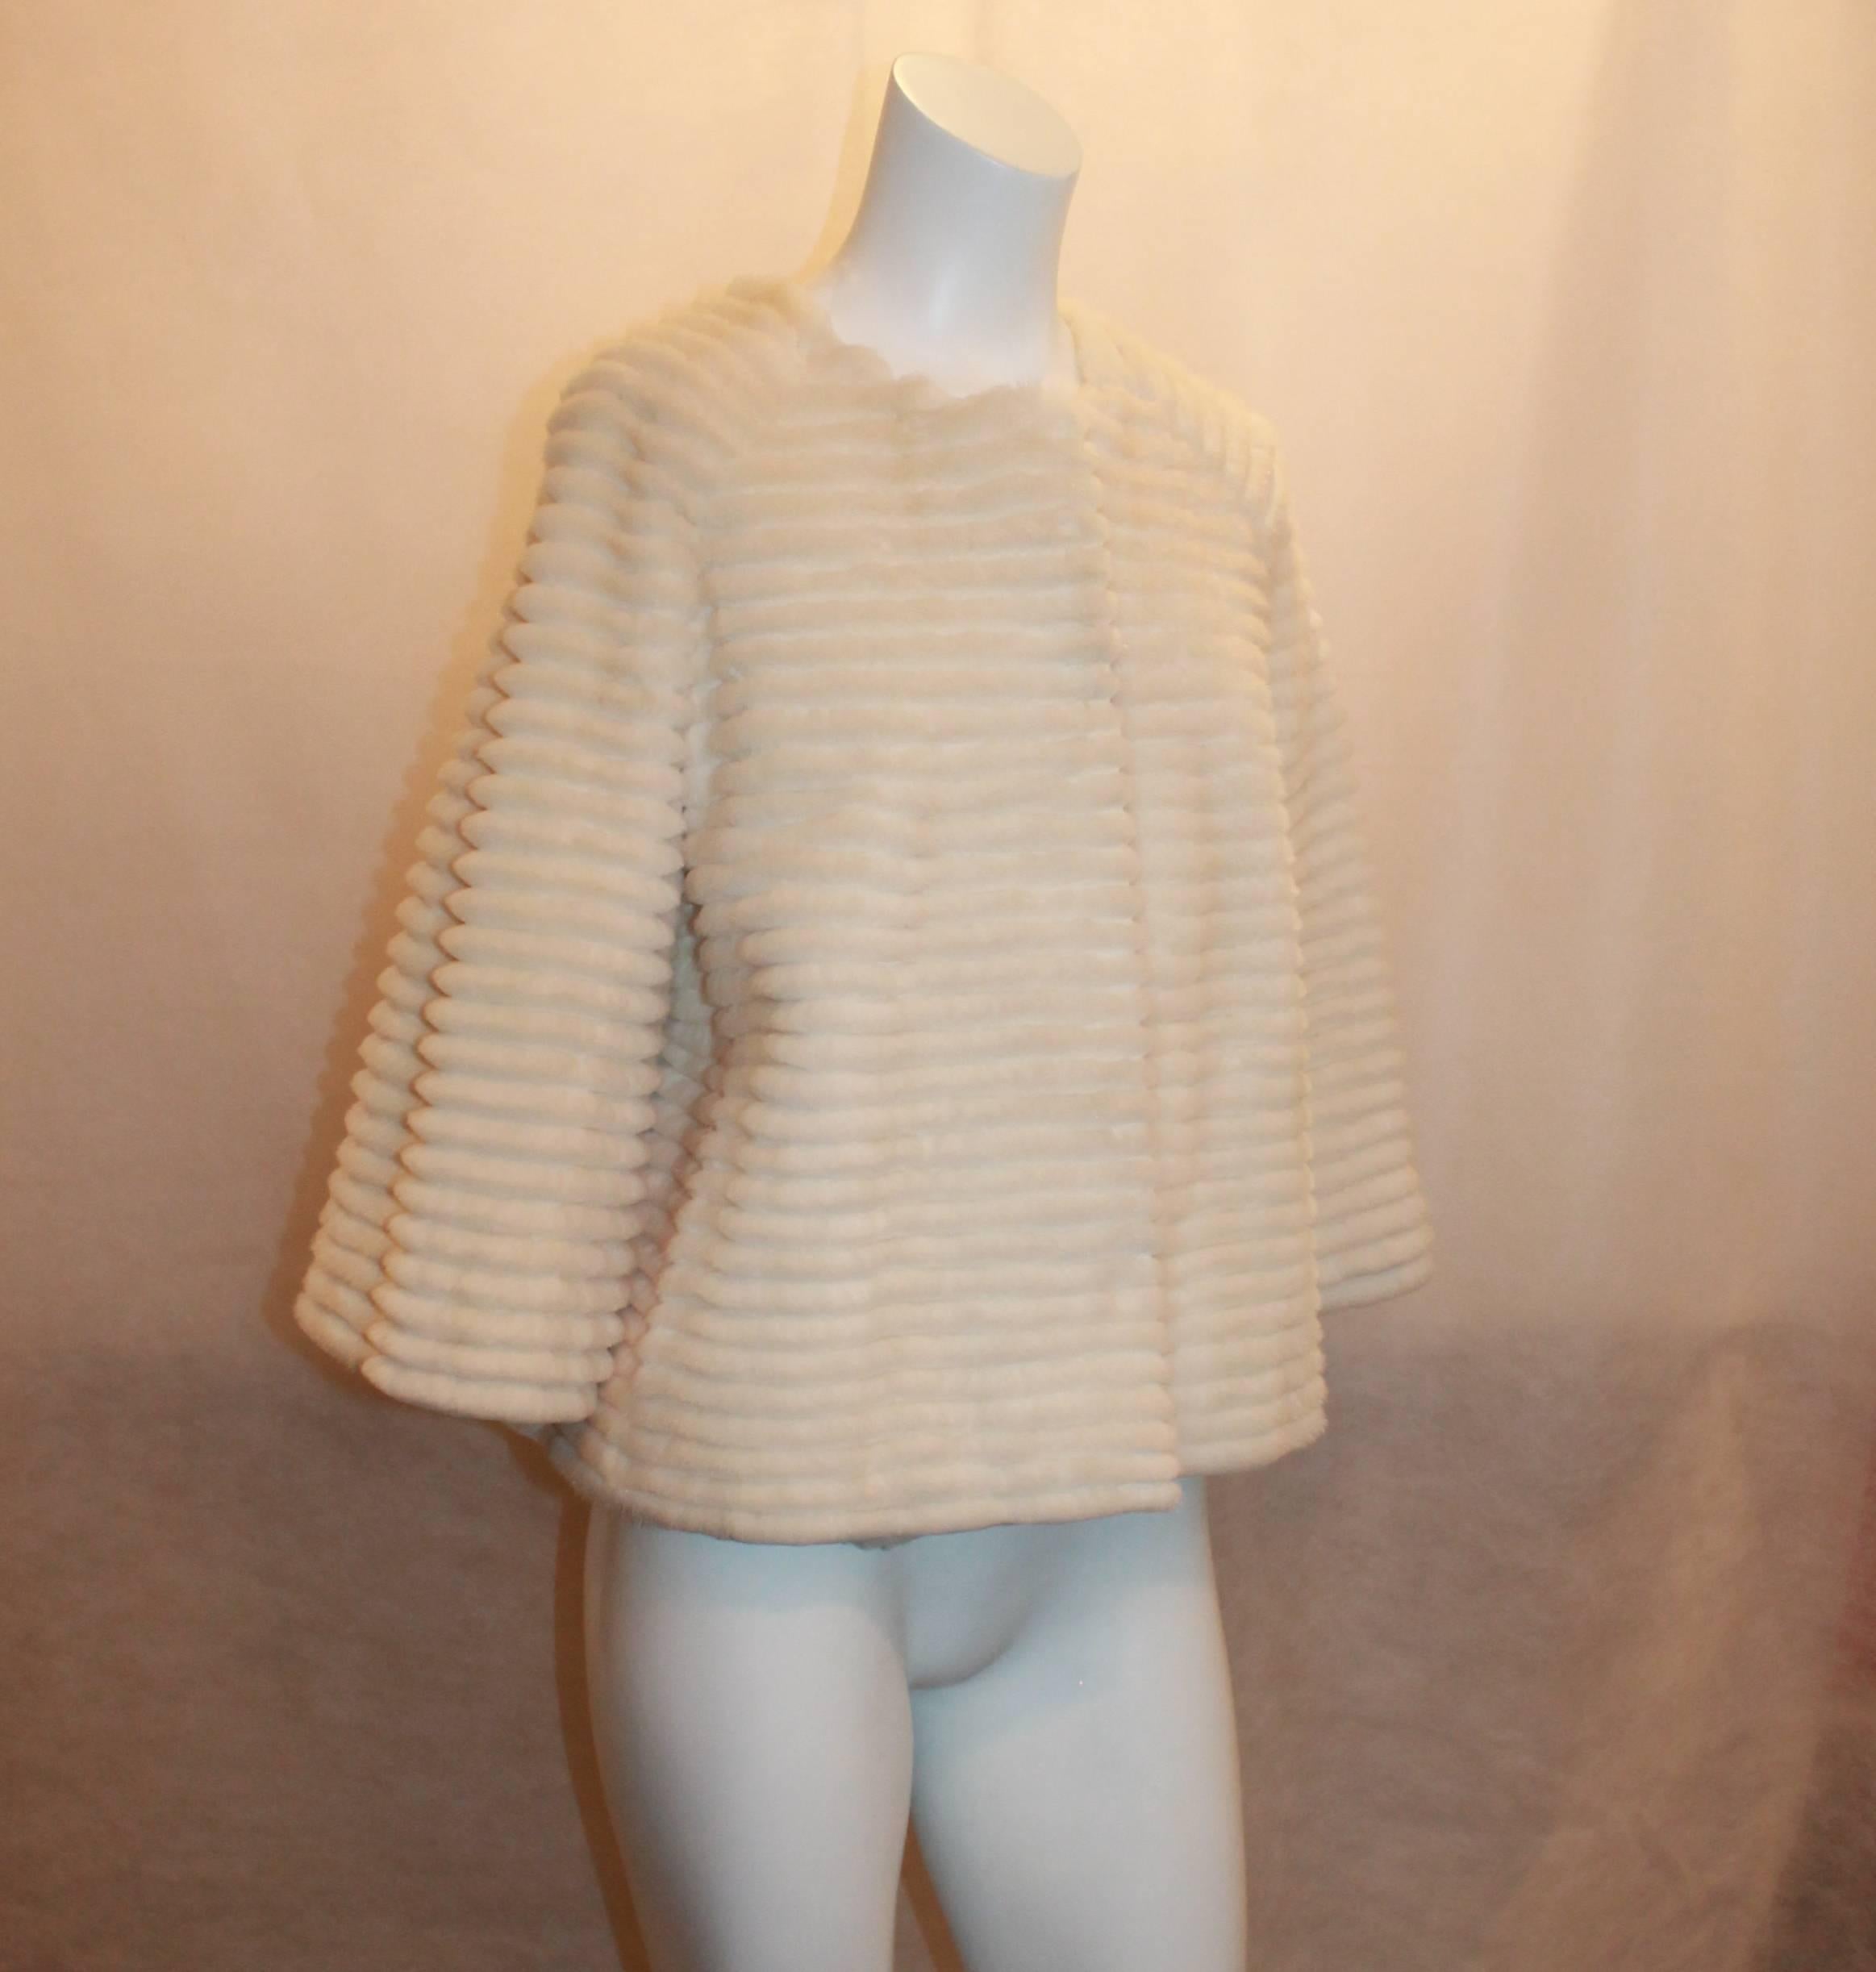 Bisang Ribbed Ivory Mink Swing Jacket - 8.  This beautiful jacket is in excellent condition.  It features 3/4 length sleeves, four hook closures, two pockets, silk lining, and a beautiful mink fur.

Measurements:
Shoulder to Shoulder: